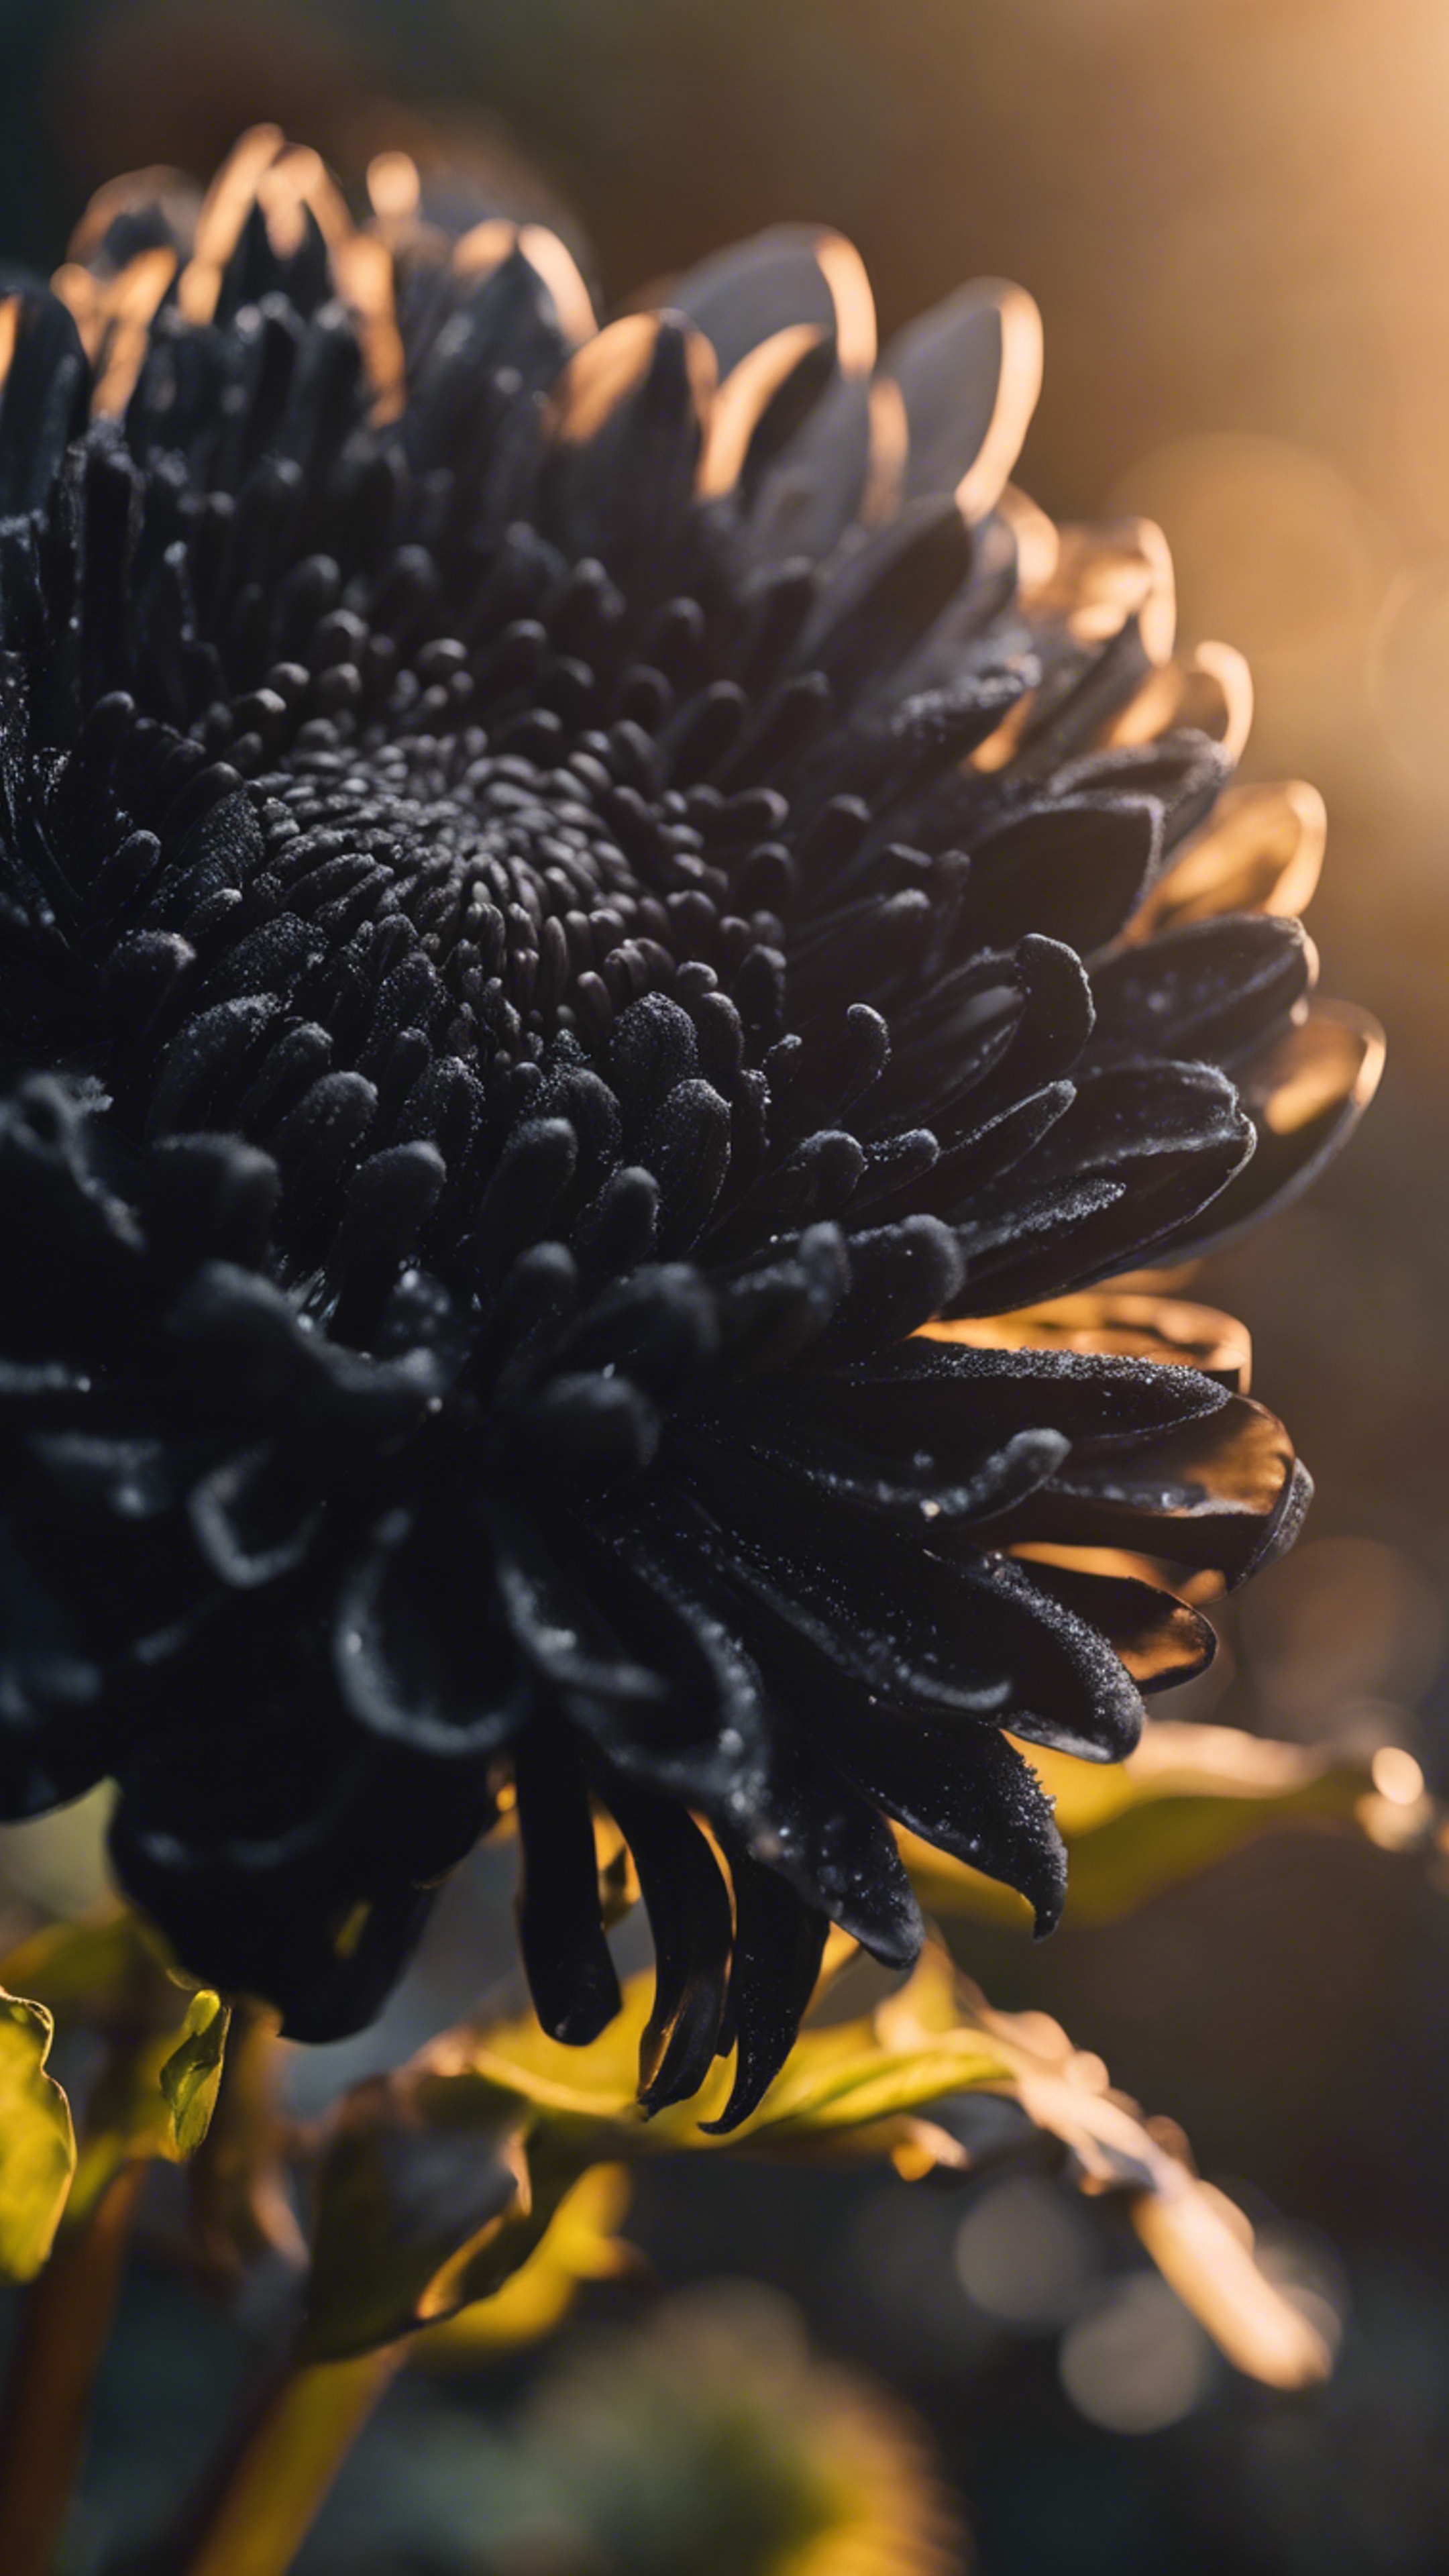 An ethereal black chrysanthemum with intricate petals against a backdrop of the setting sun. Дэлгэцийн зураг[4b40c3df292a42548d77]